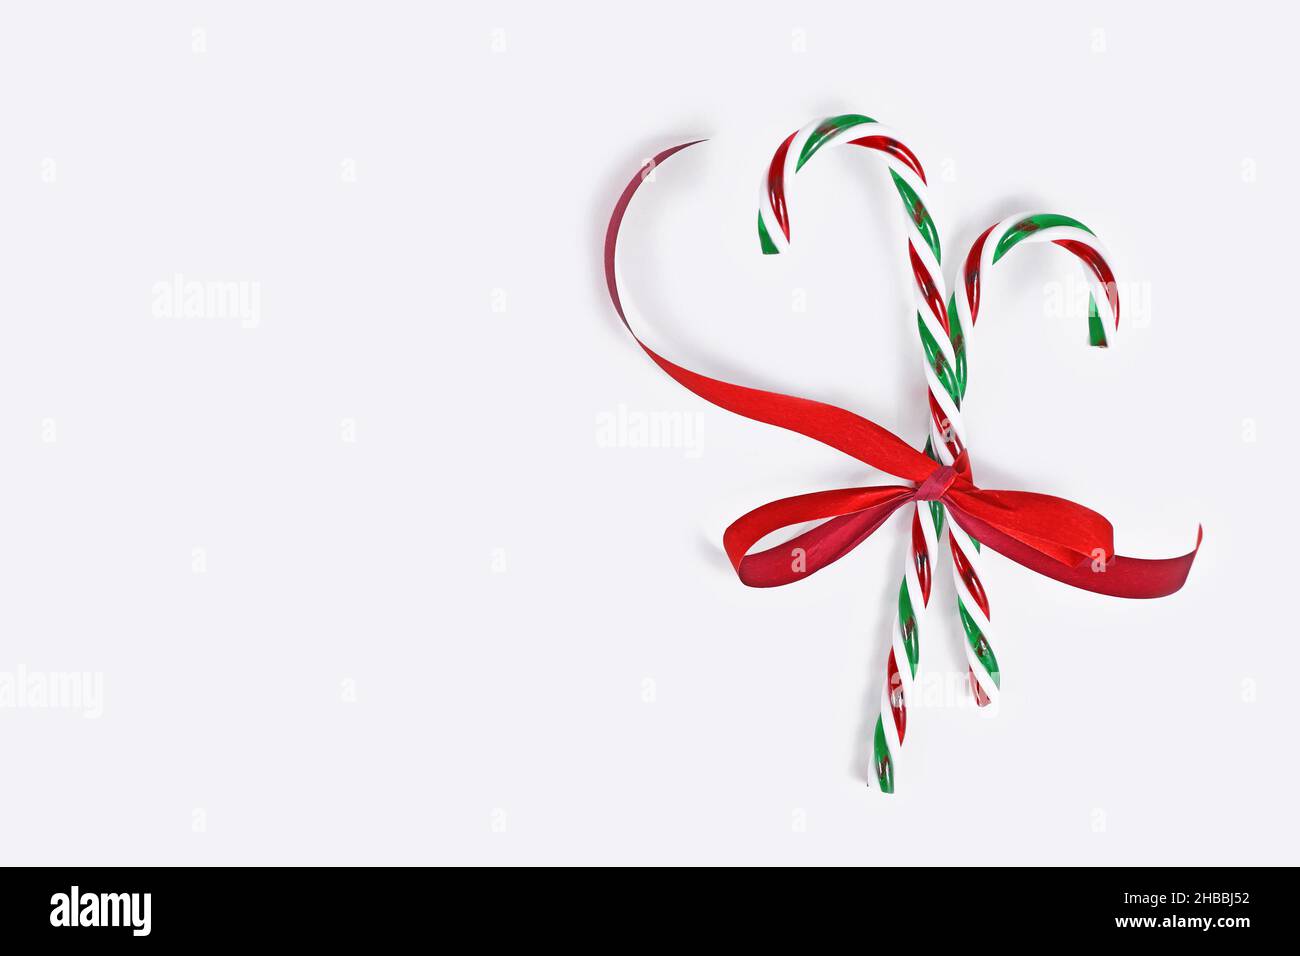 Striped candy canes tied together with red ribbon on side of white background with copy space Stock Photo